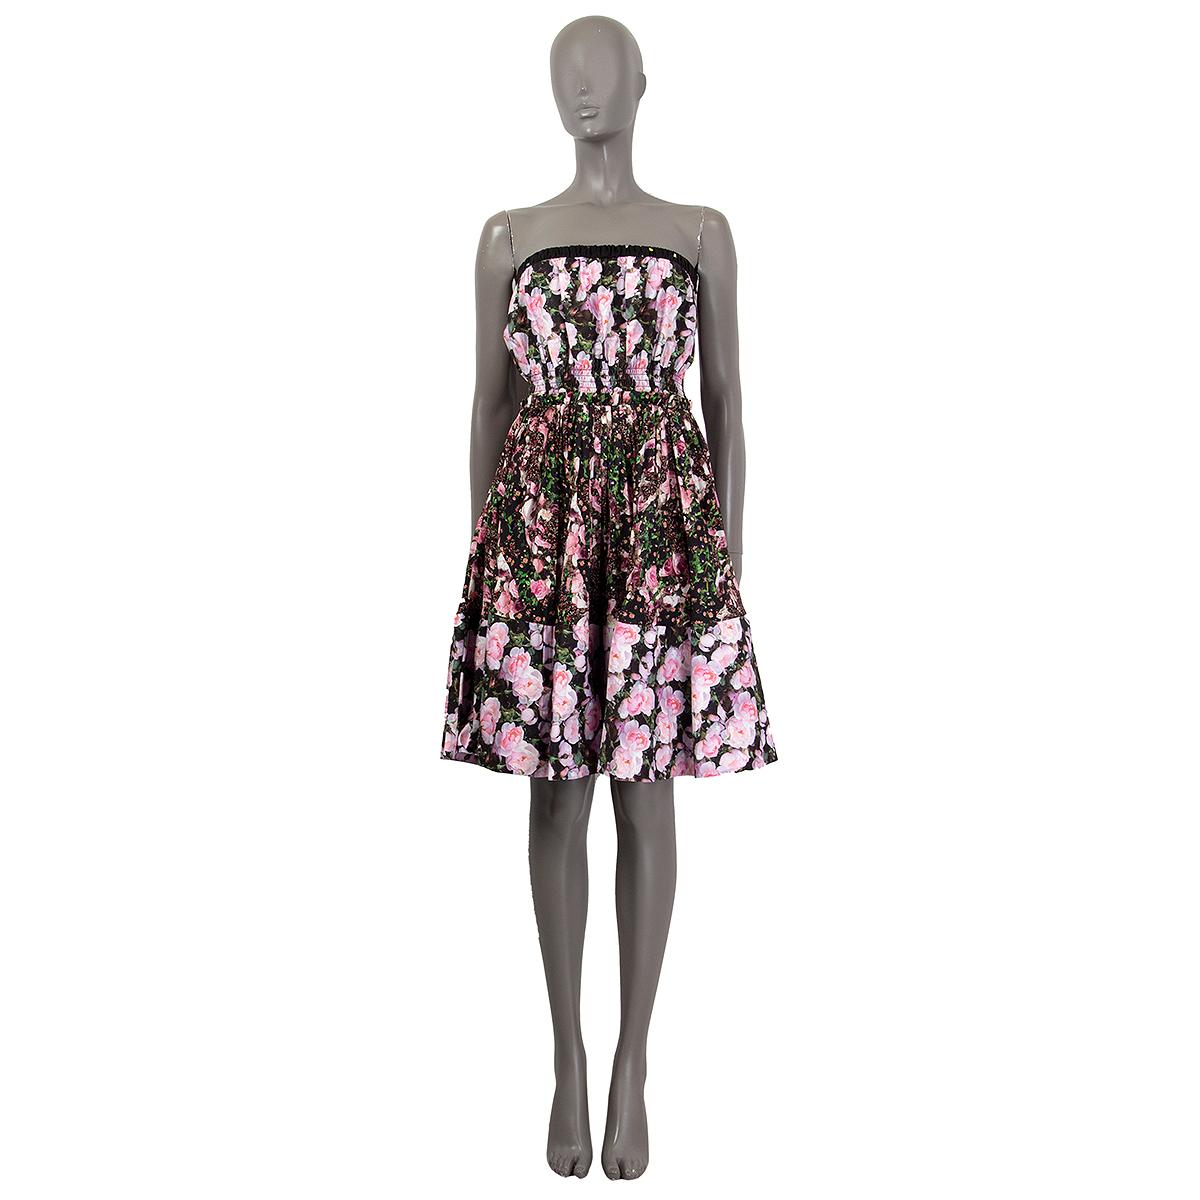 100% authentic Givenchy floral pleated skirt strapless dress in pink, black, green, rose and lilac cotton (100%). Closes on the side with a zipper. Partially lined with second application in multi-color polyamide (66%) and silk (34%). Has been worn